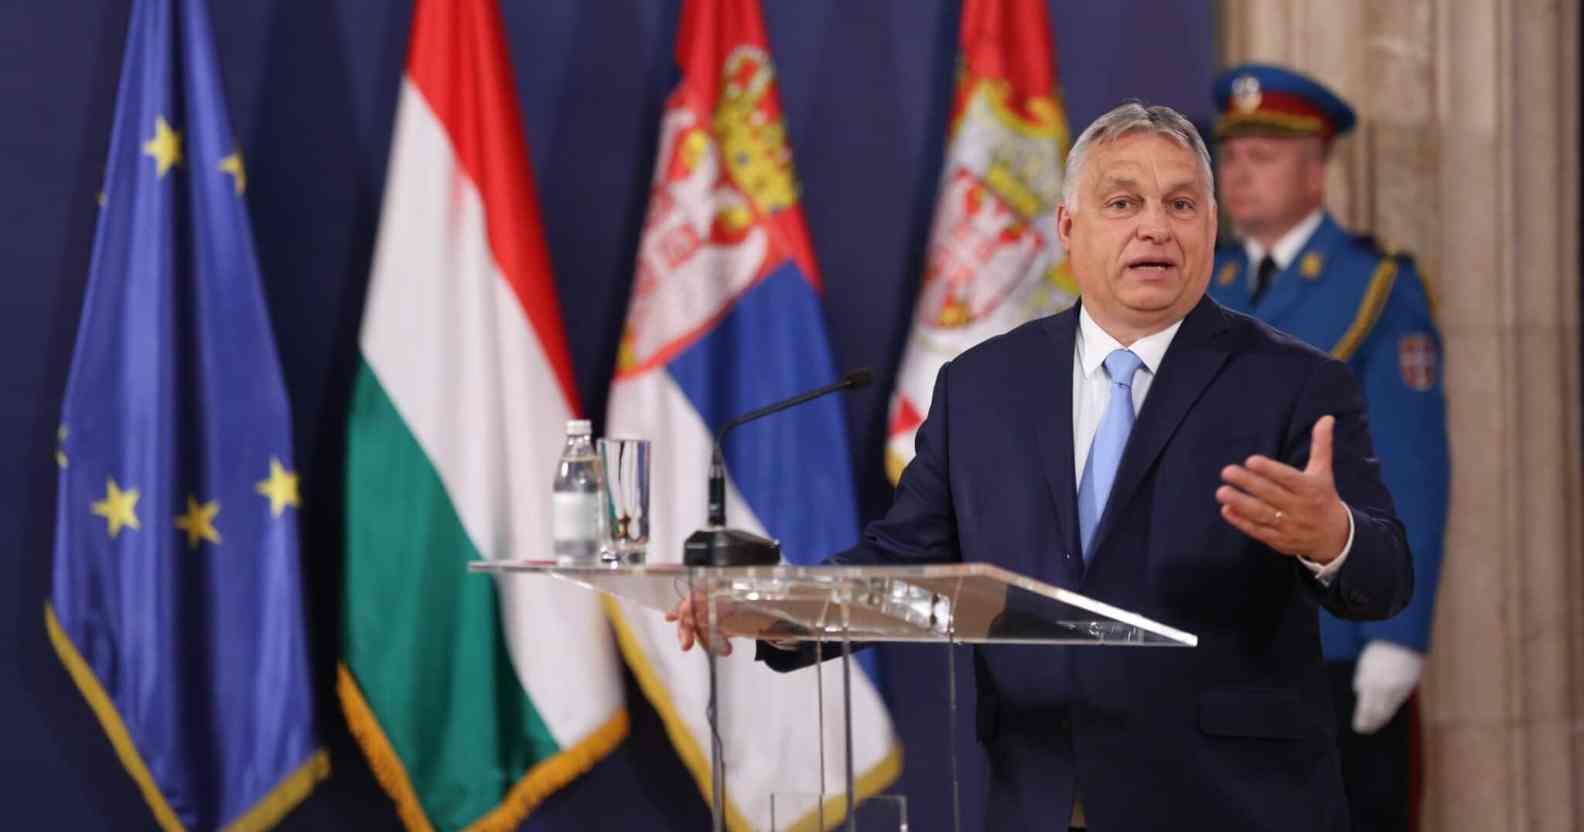 EU staunchly condemns Hungary's vile anti-LGBT+ law as an 'attack on democracy'